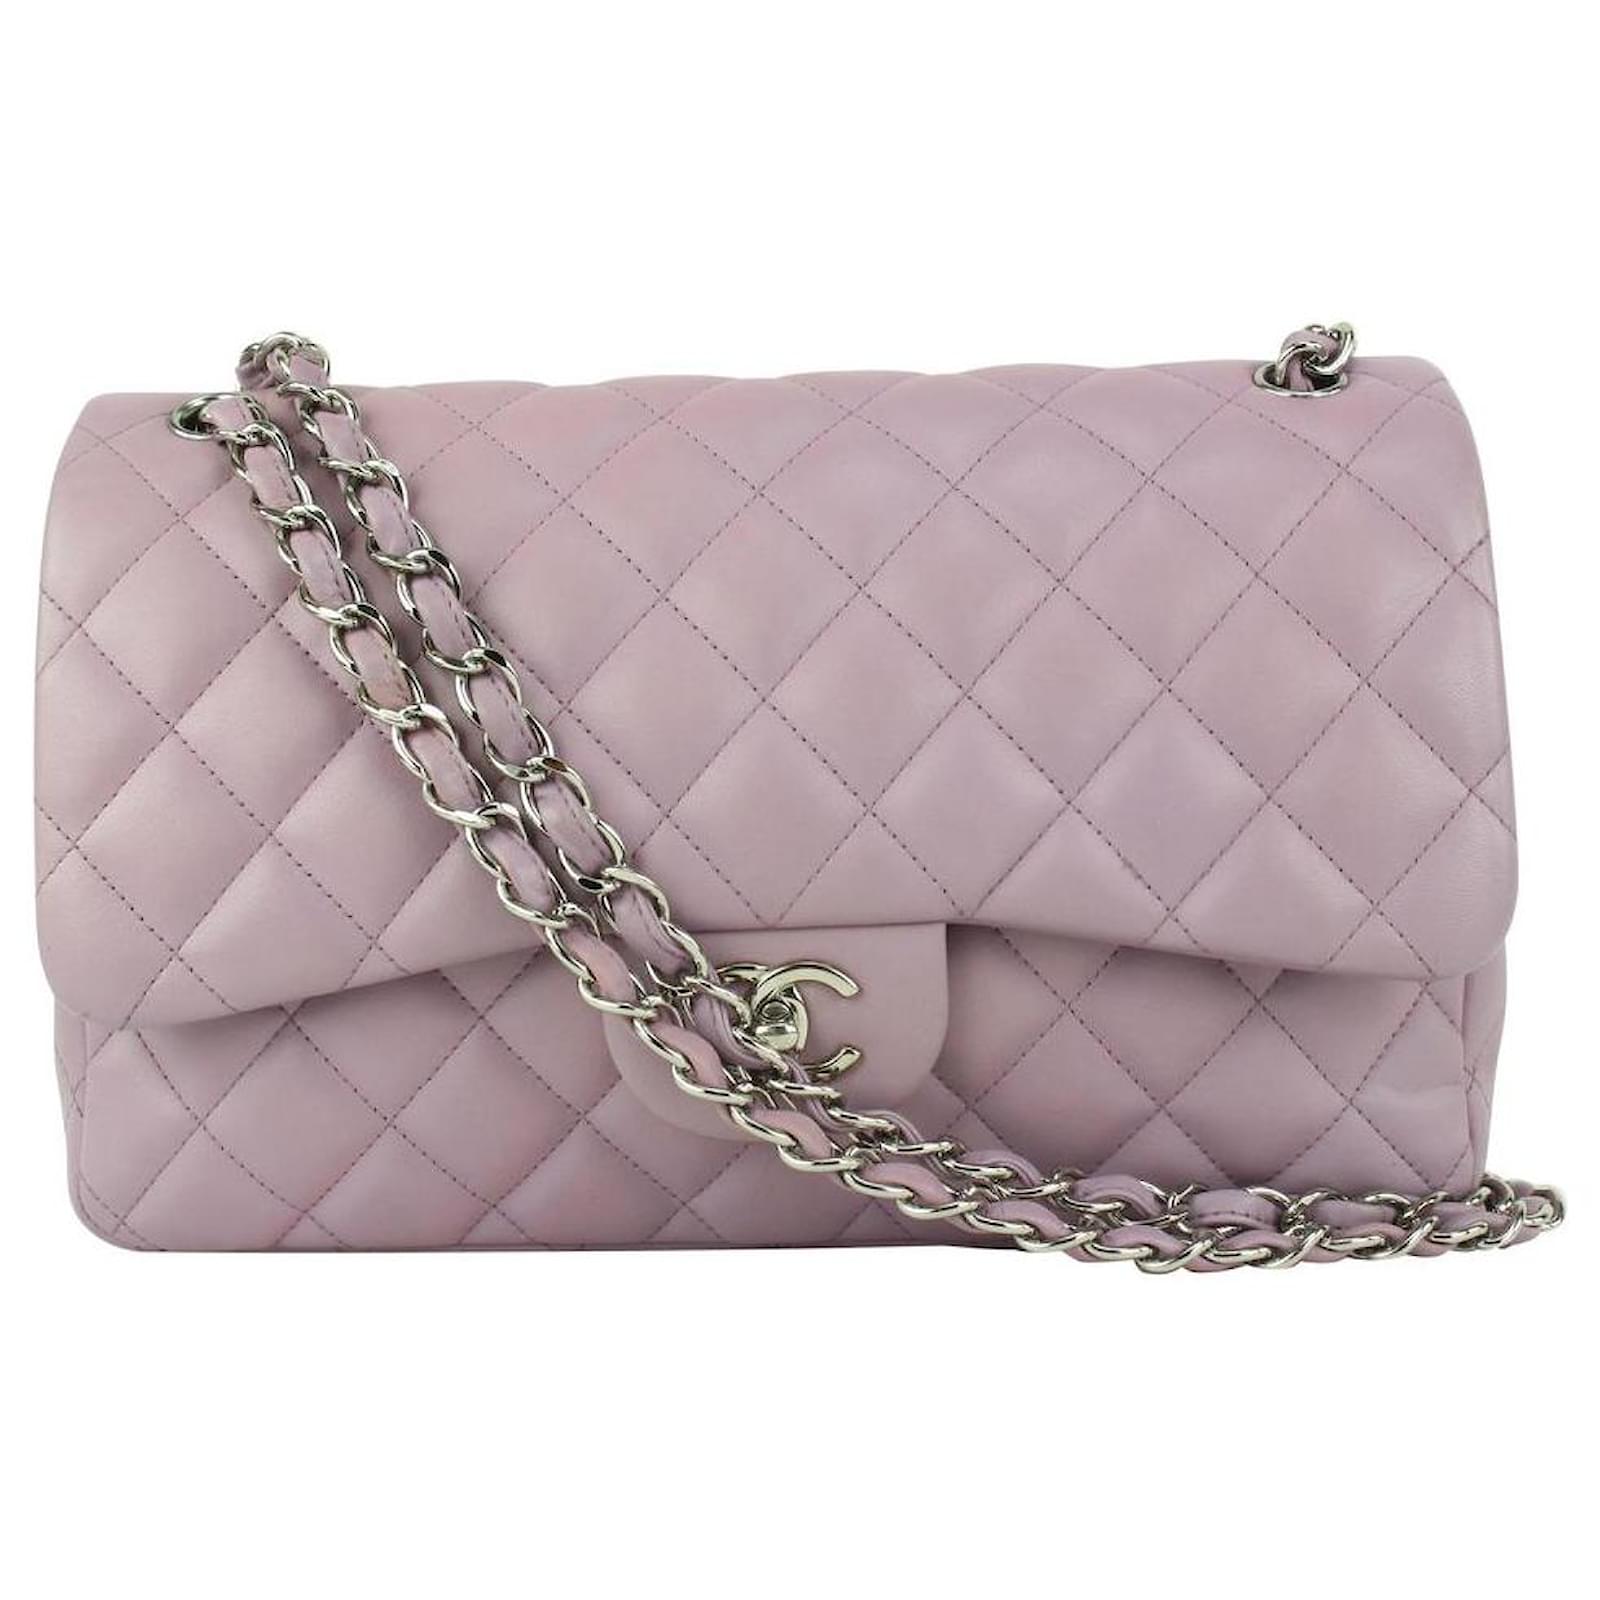 Chanel Classic Lambskin Bag in Lavender